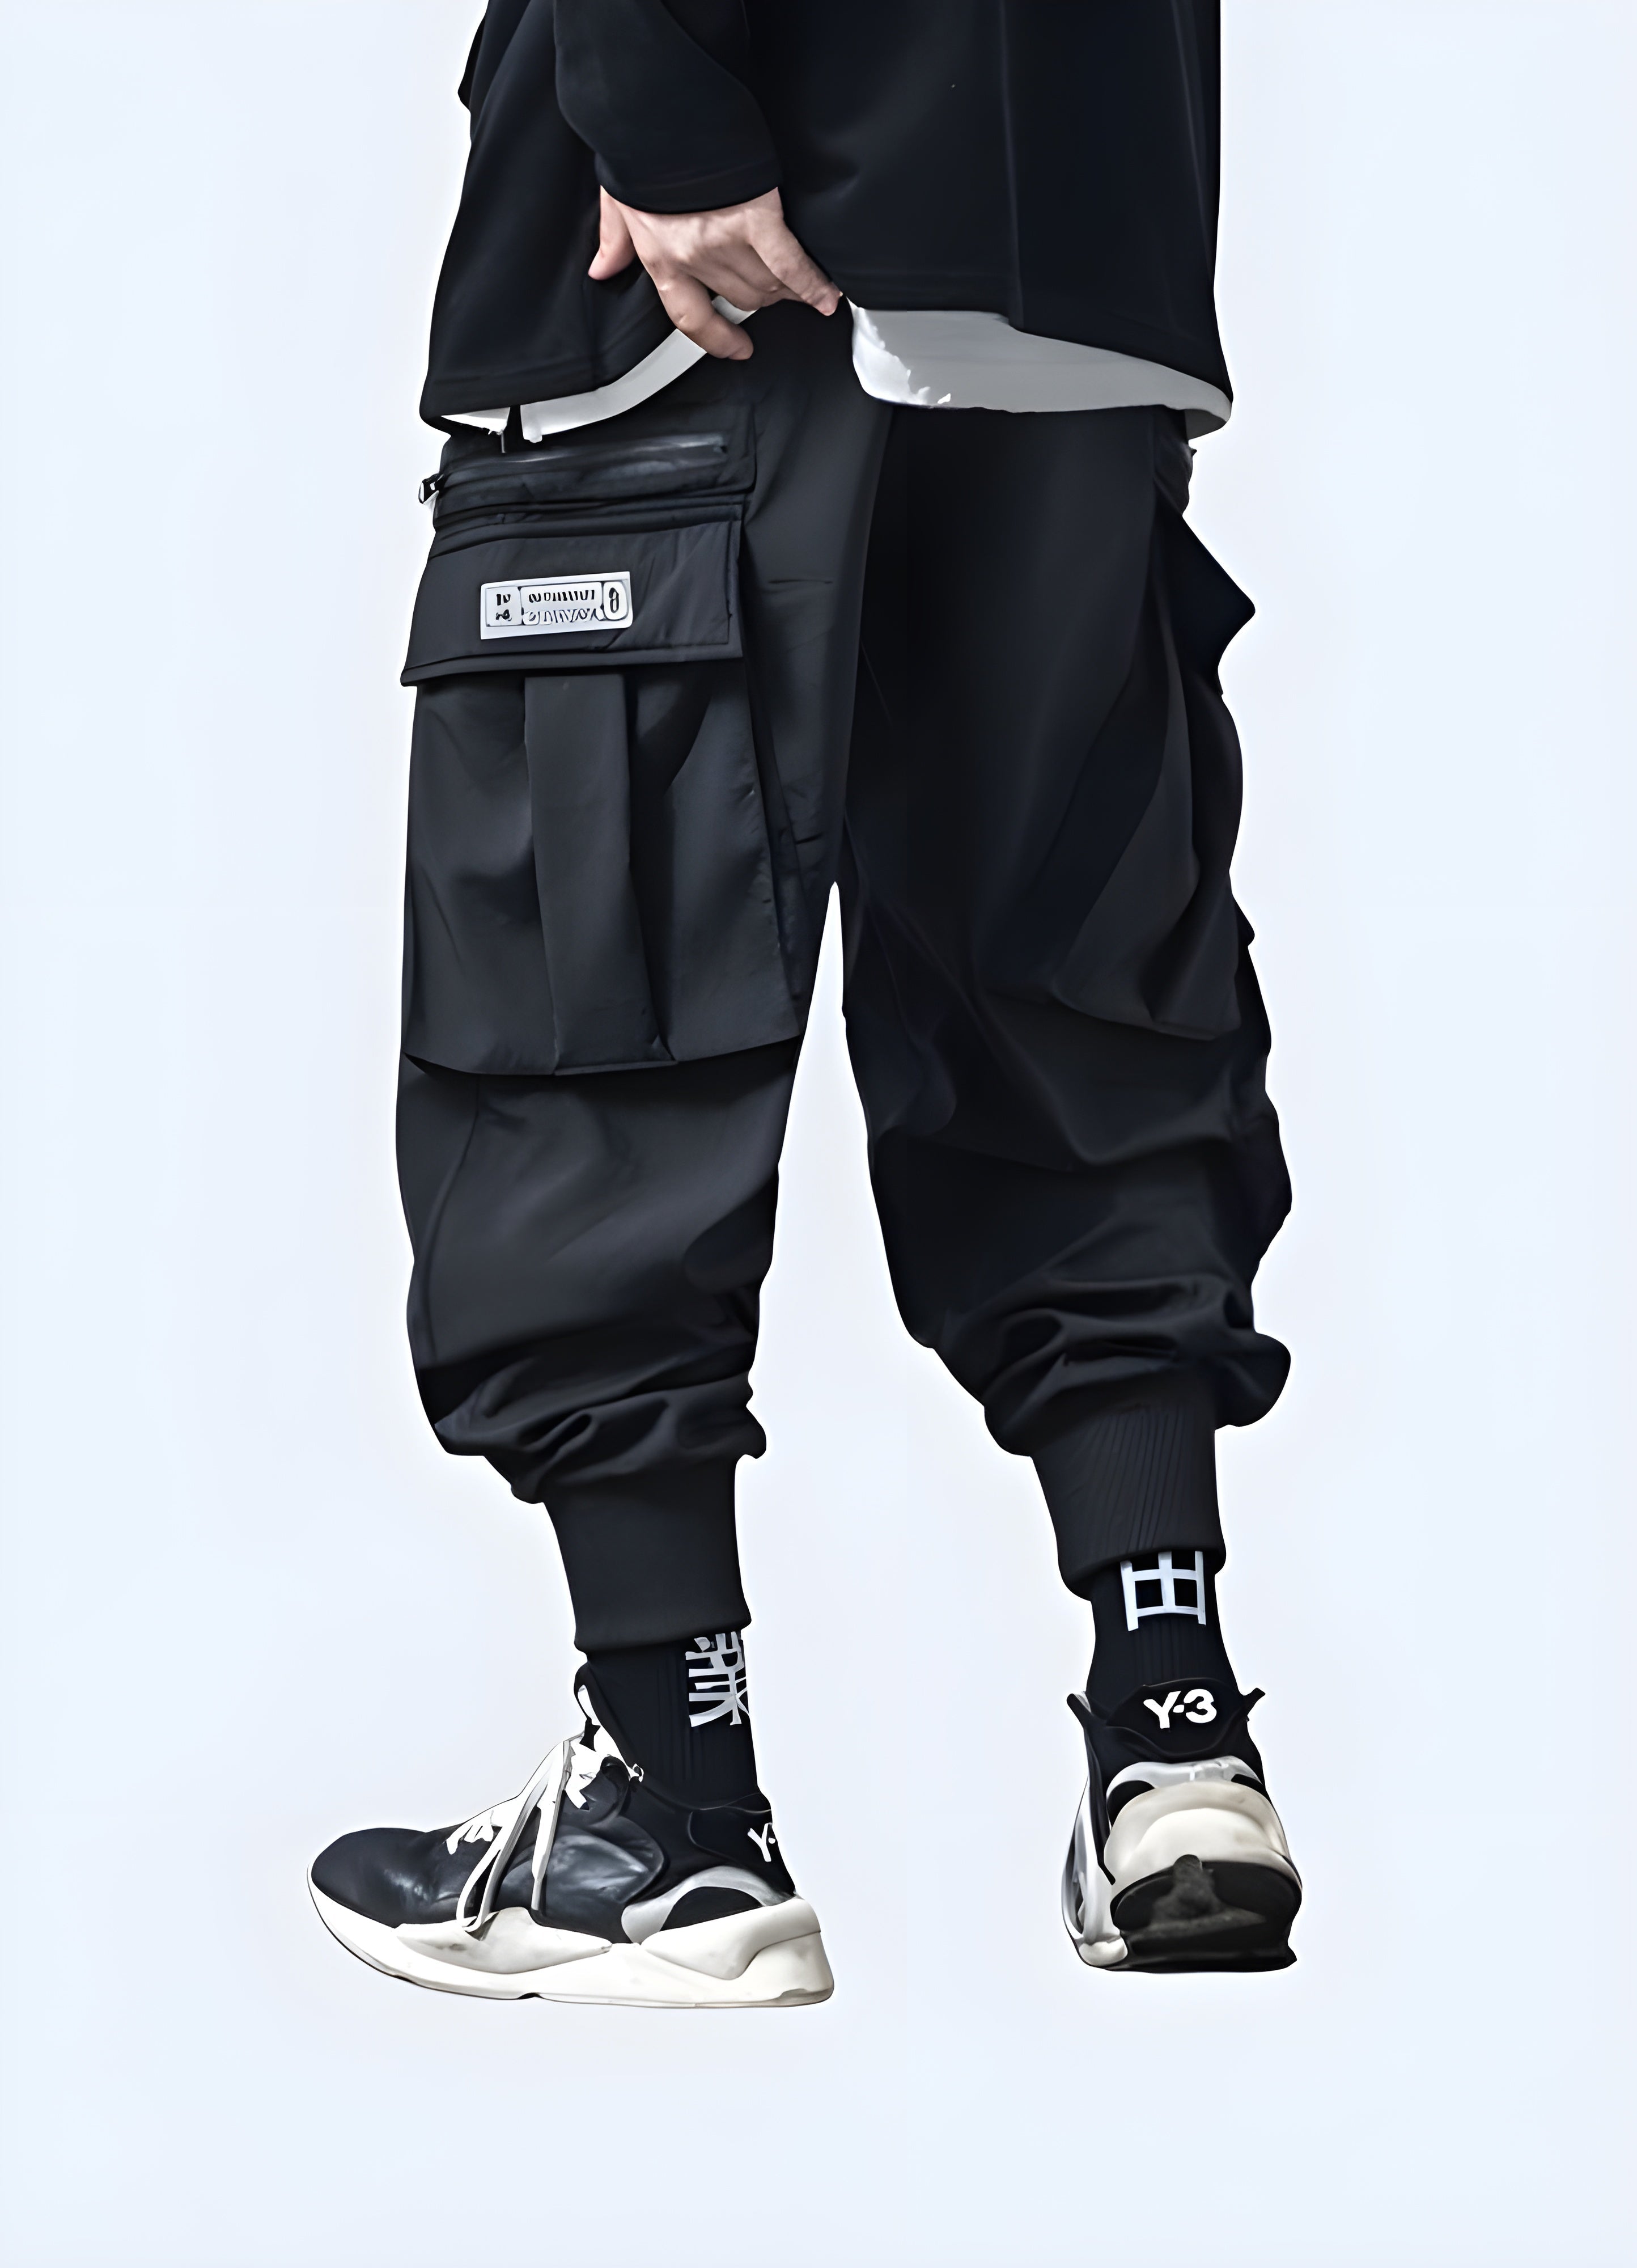 Conquer the concrete jungle in these sleek Urban Cargo Pants, designed for both function and style.